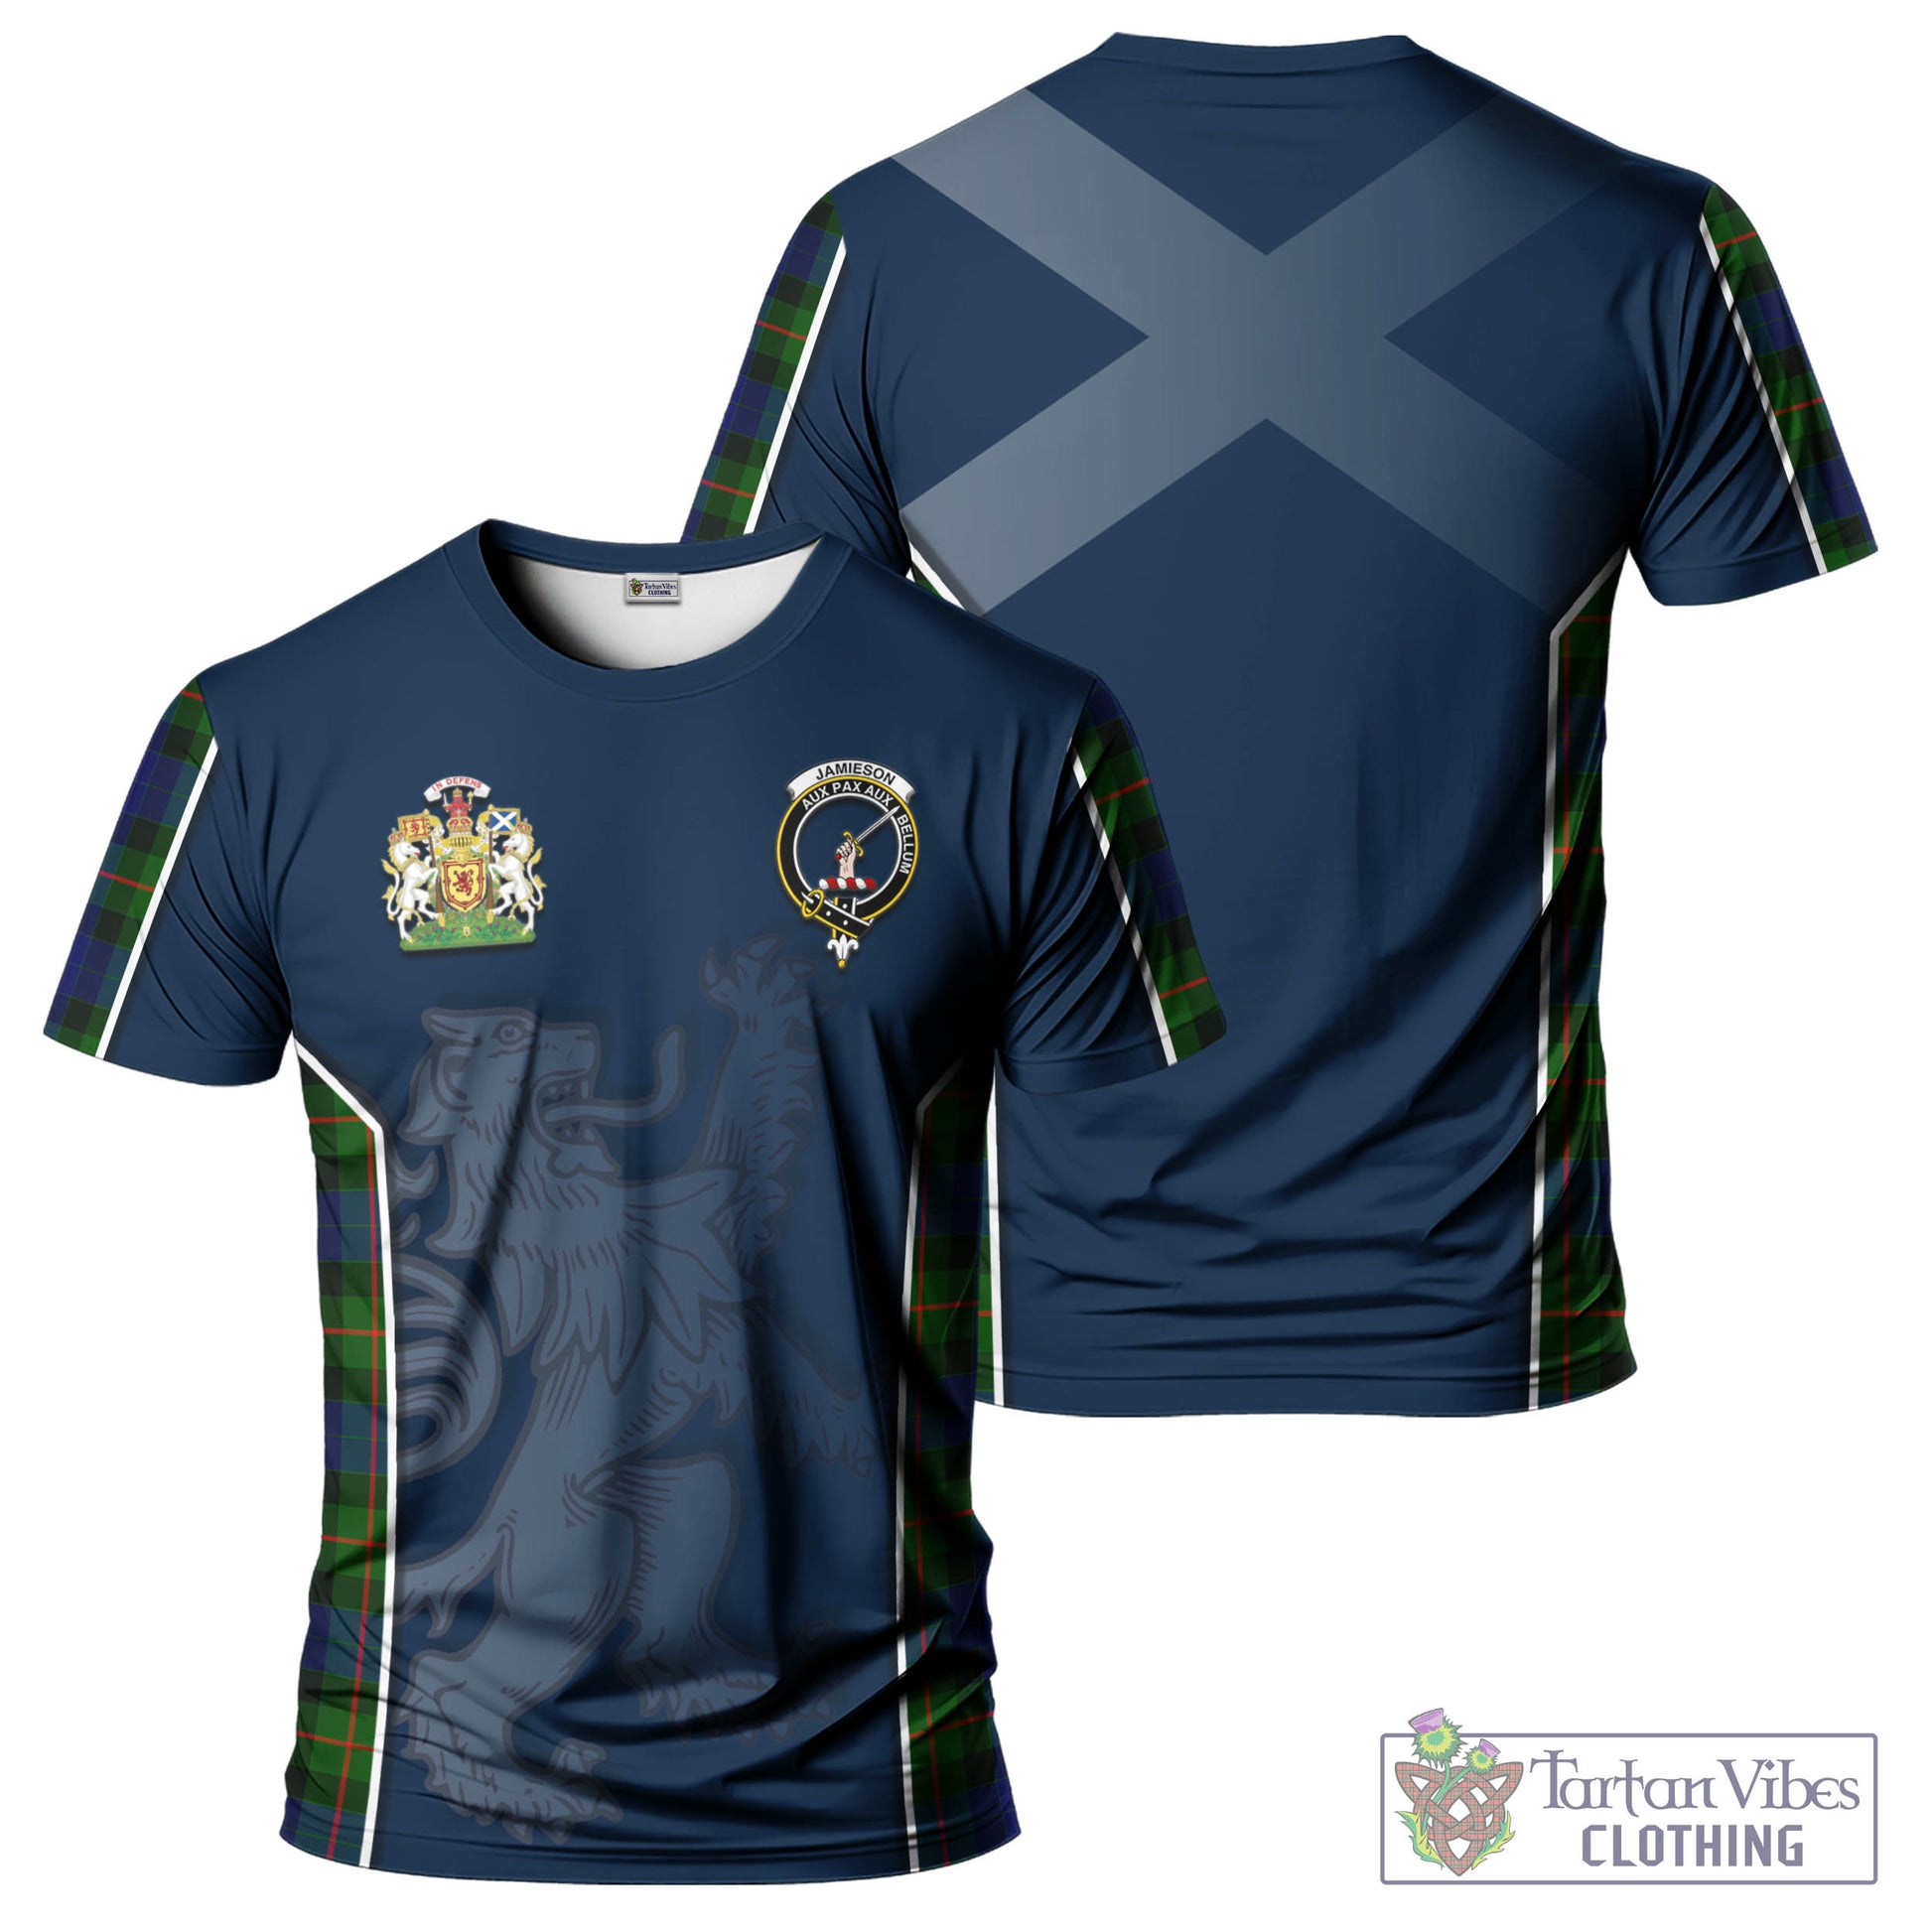 Tartan Vibes Clothing Jamieson Tartan T-Shirt with Family Crest and Lion Rampant Vibes Sport Style